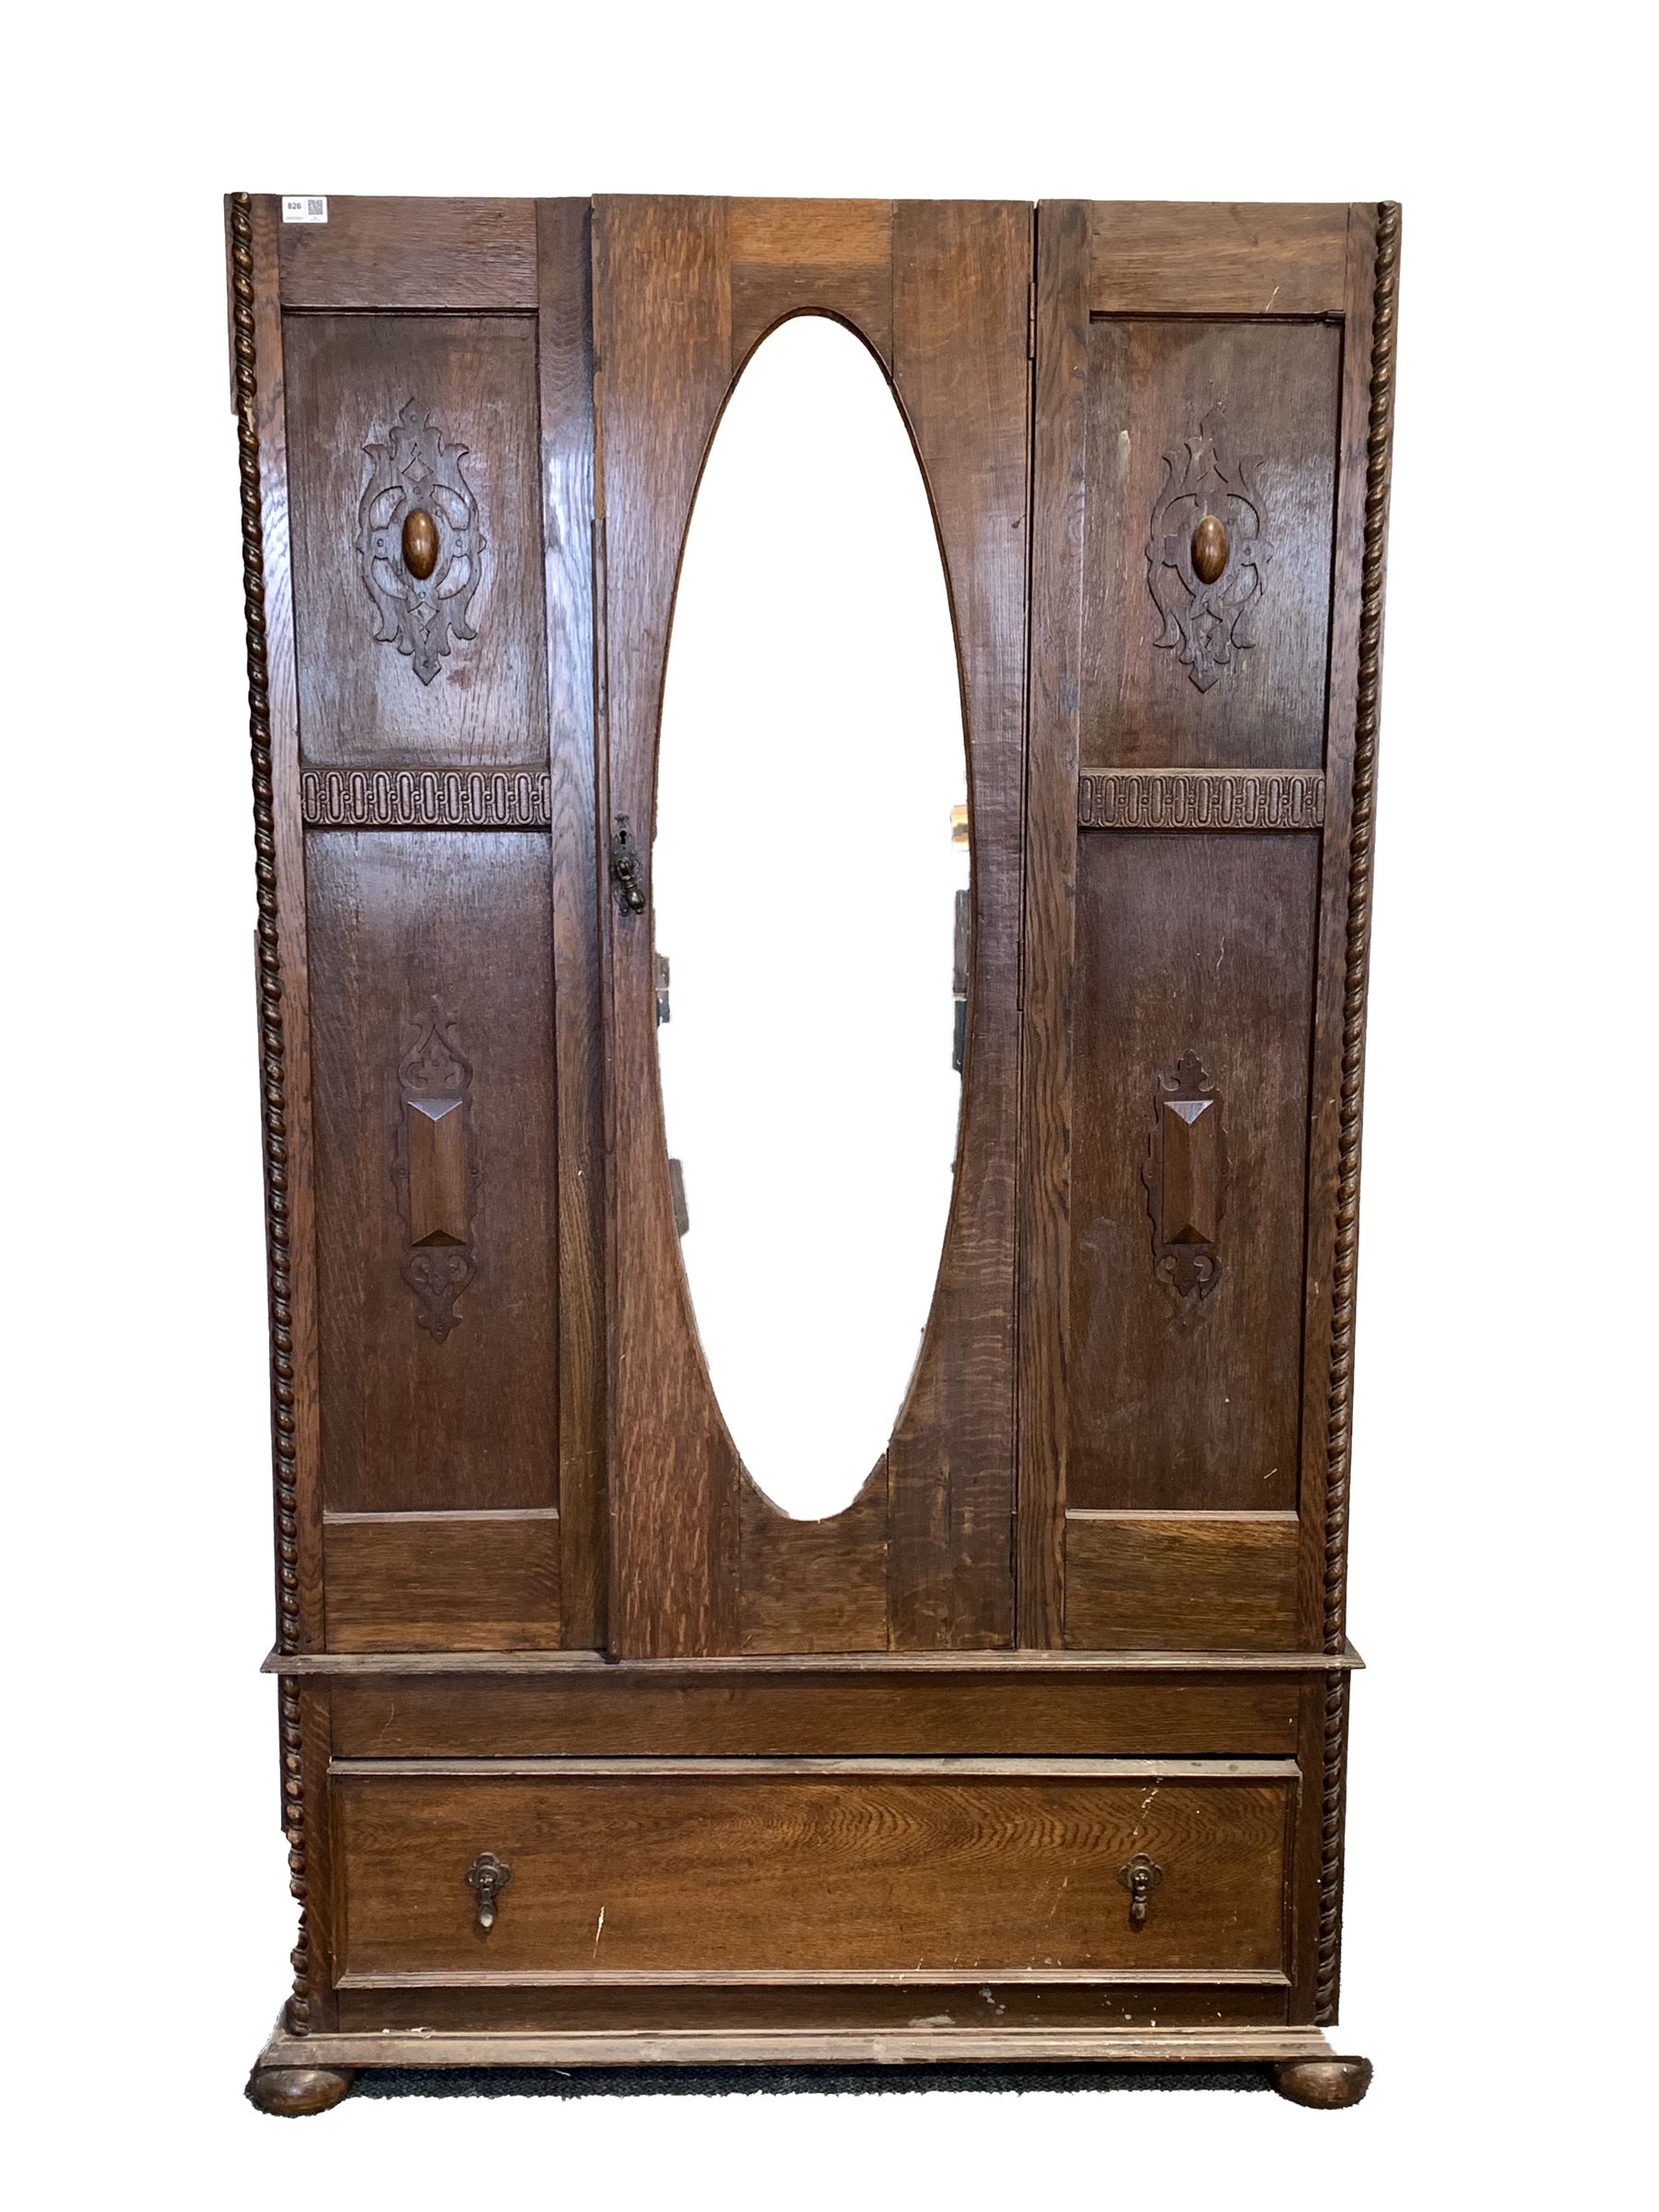 Early 20th century oak single wardrobe, with bevelled oval mirror enclosing interior fitted for hang